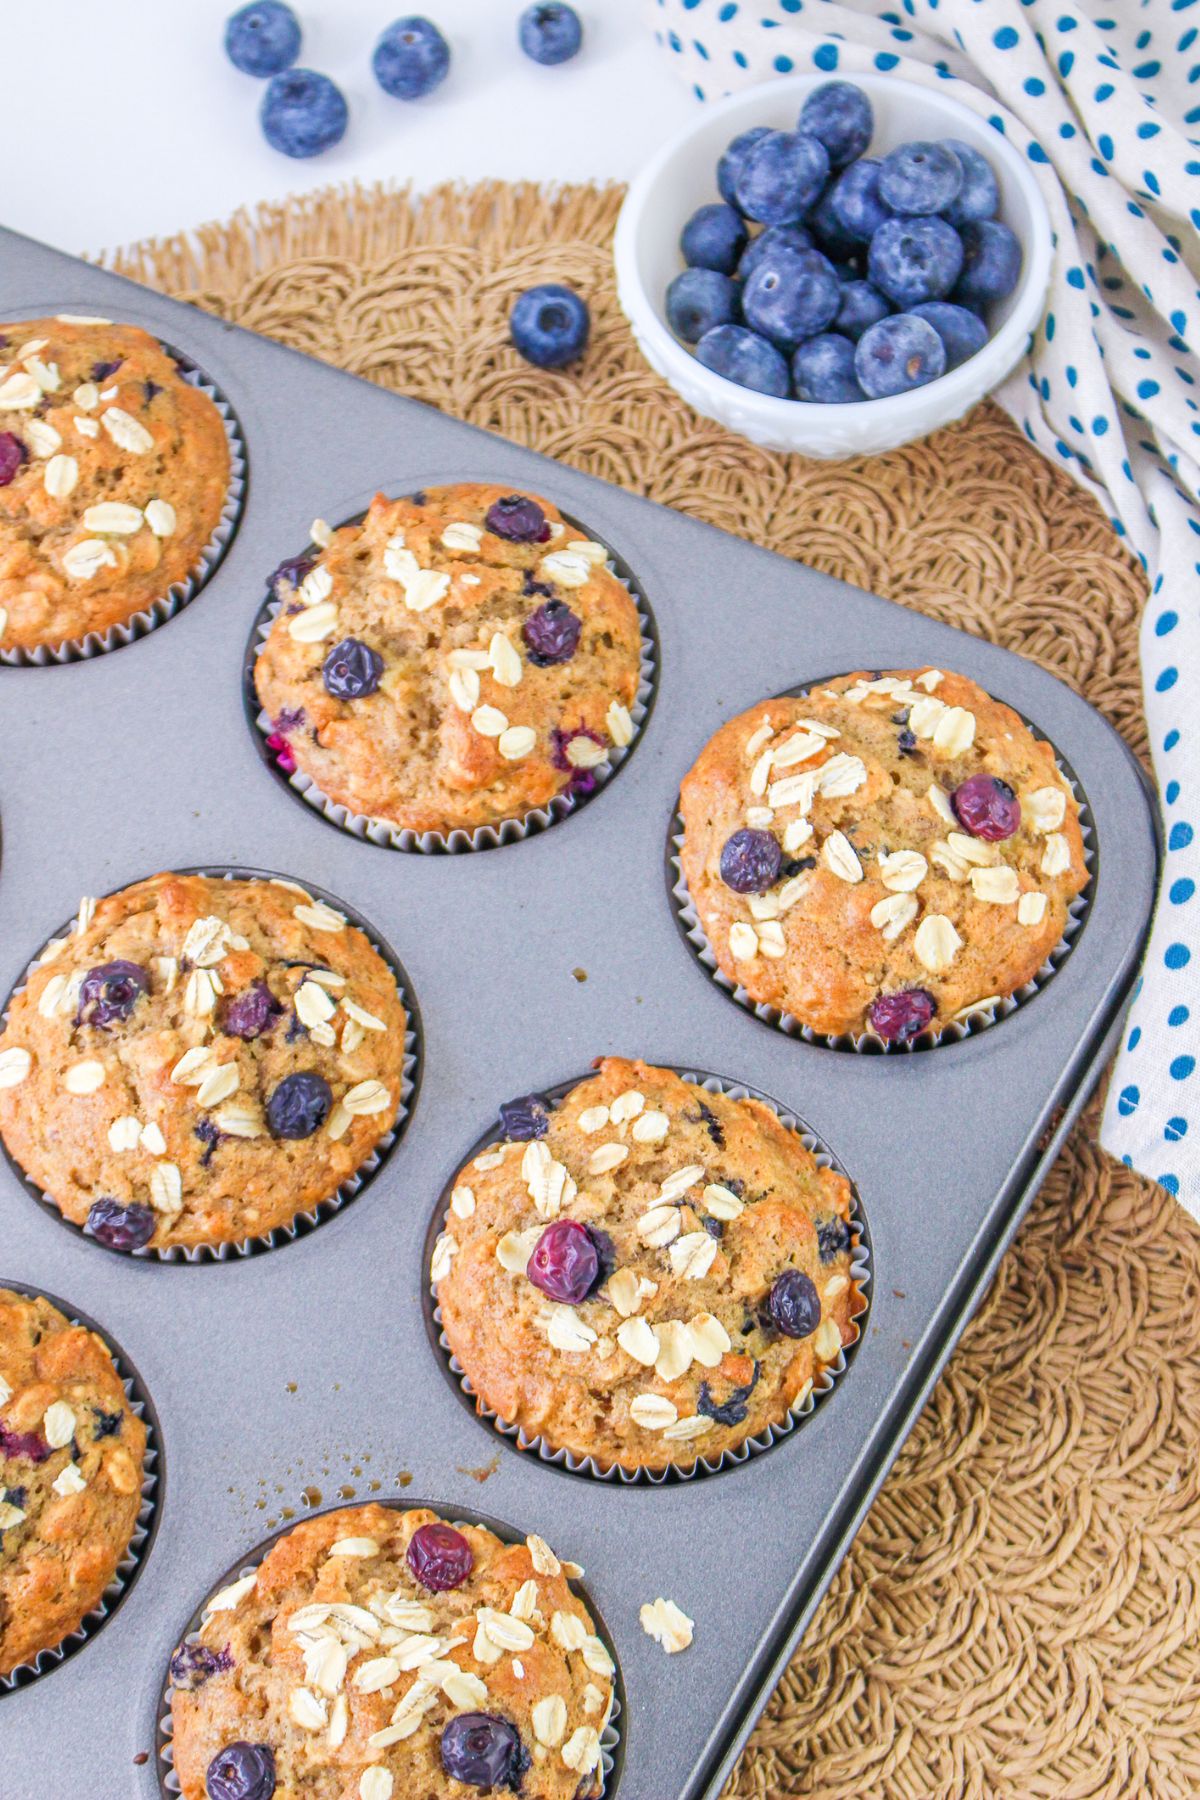 Blueberry muffins in a muffin tin with blueberries.